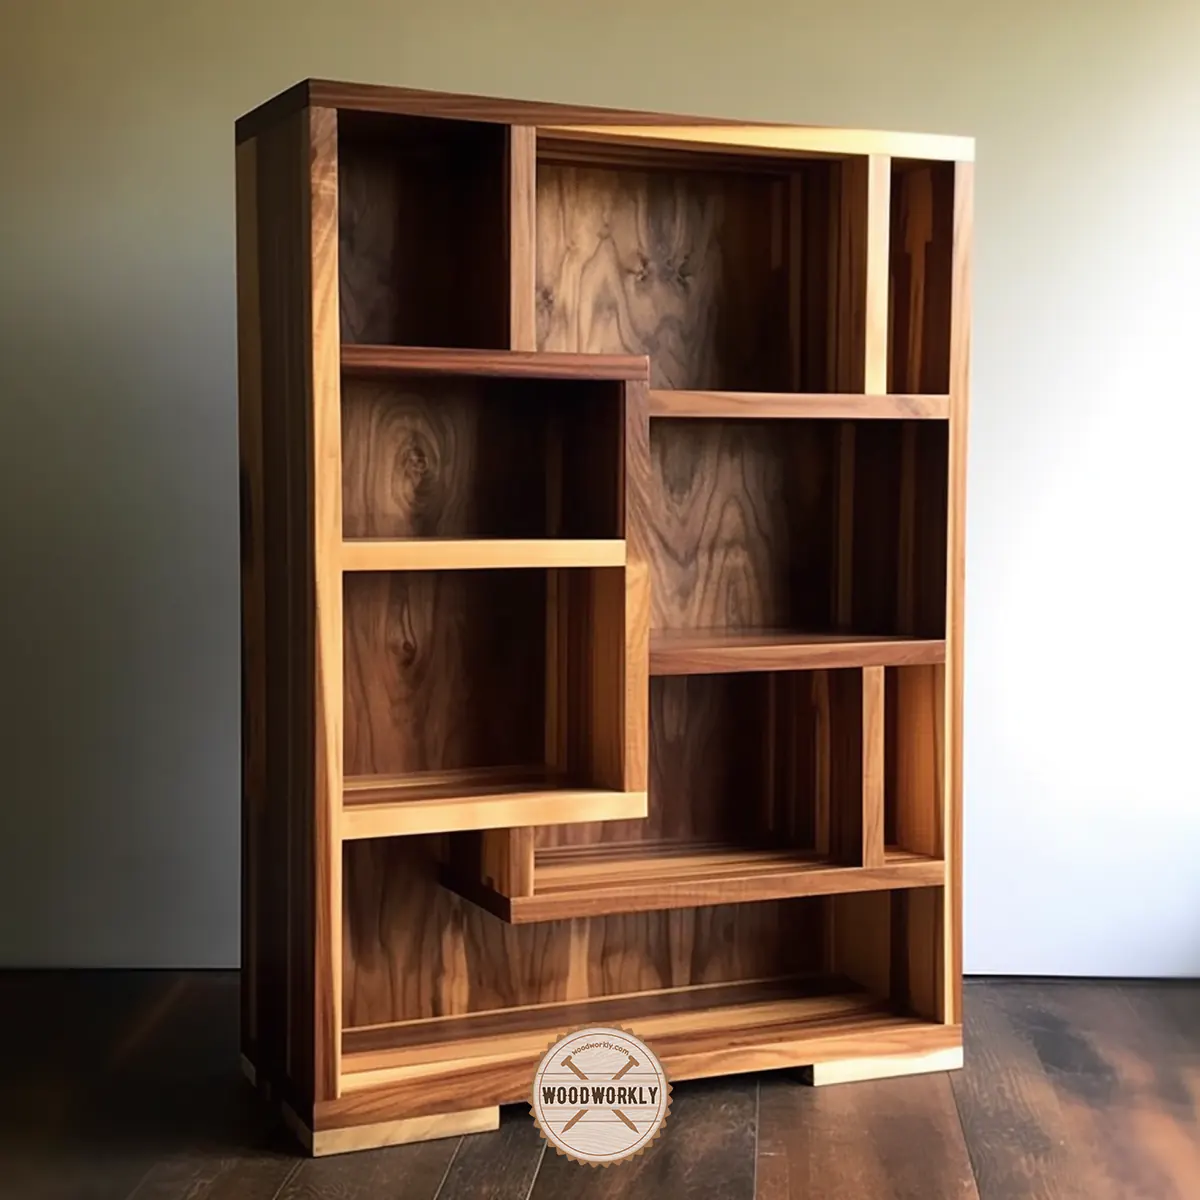 Bookshelf finished with tung oil finish